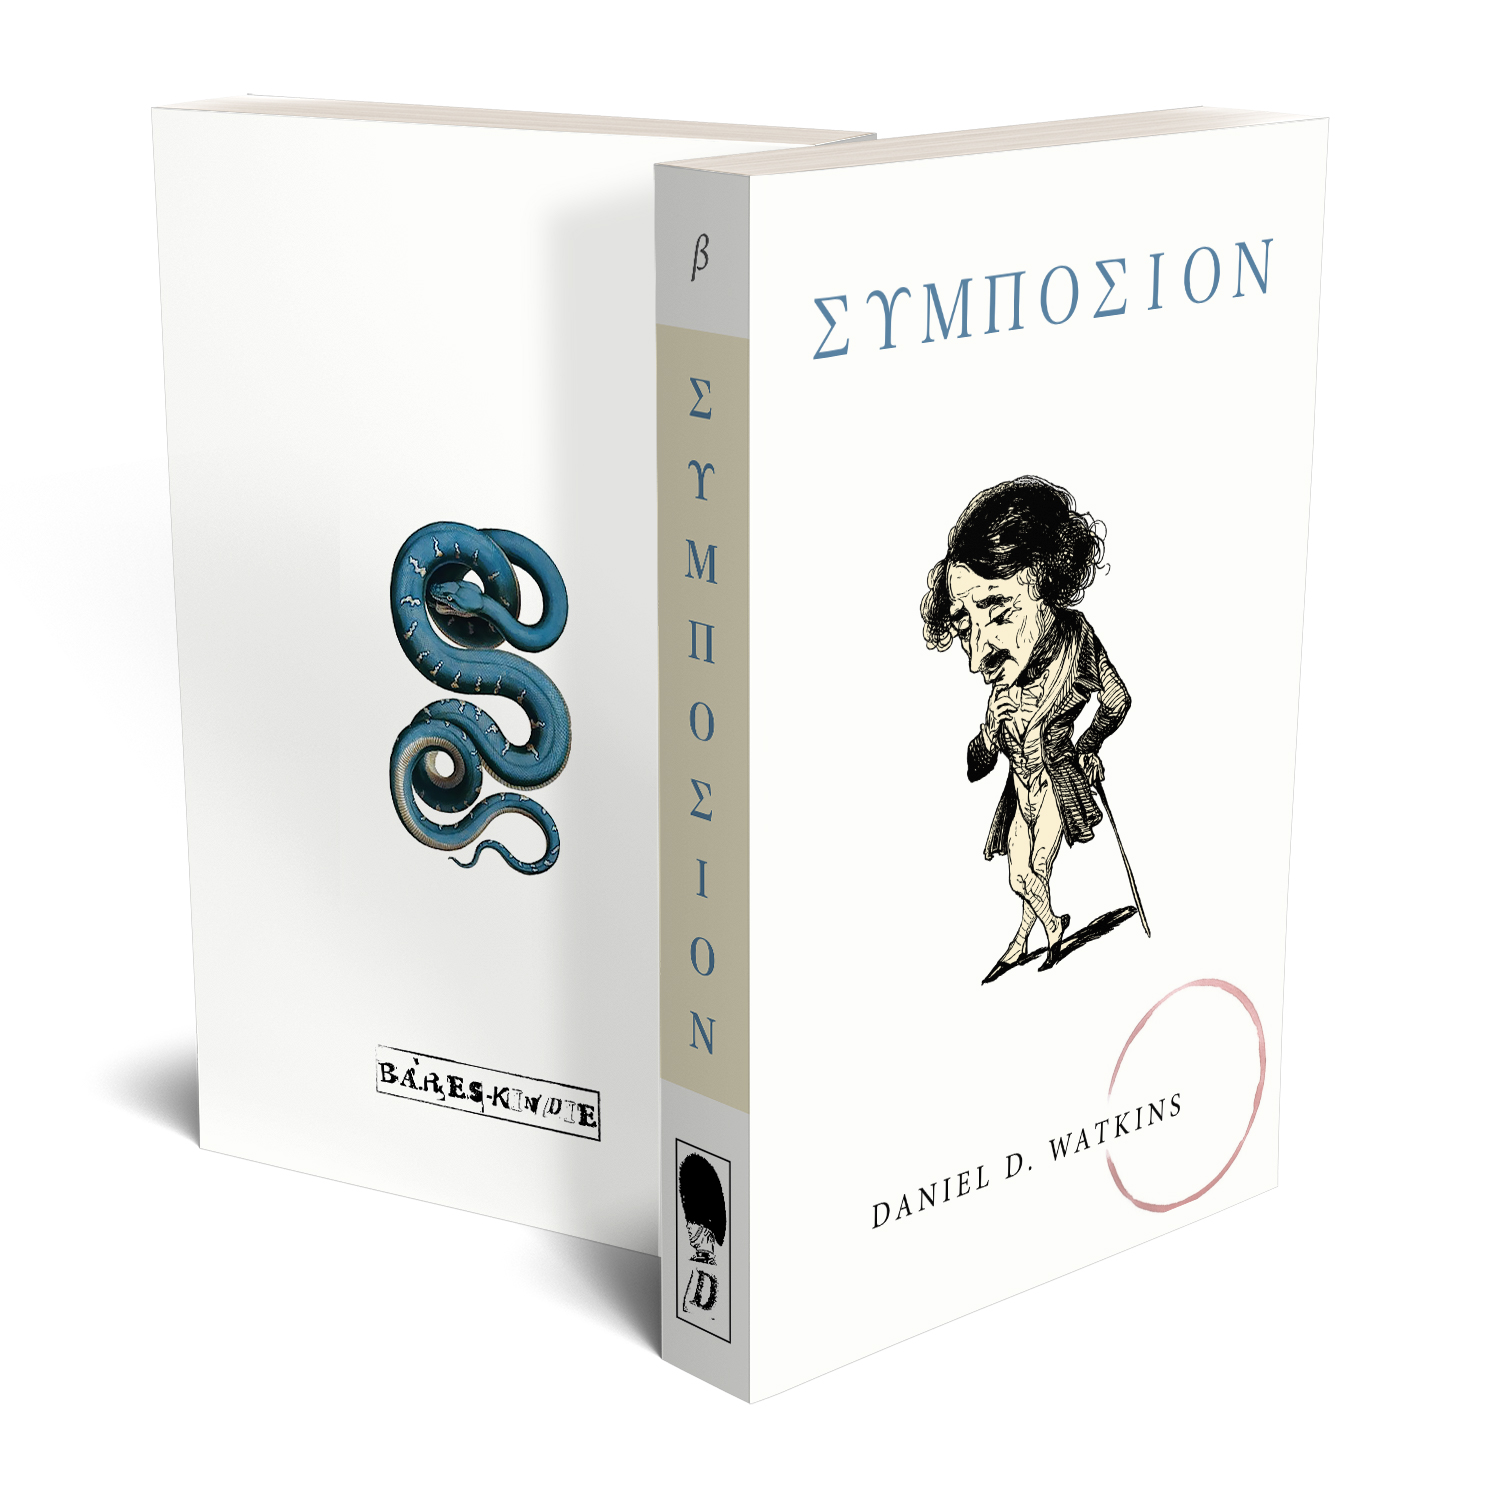 'Symposion' is a wildly esoteric three part novel. The author is Daniel C Watkins. The book cover design and interior formatting are by Mark Thomas. To learn more about what Mark could do for your book, please visit coverness.com.